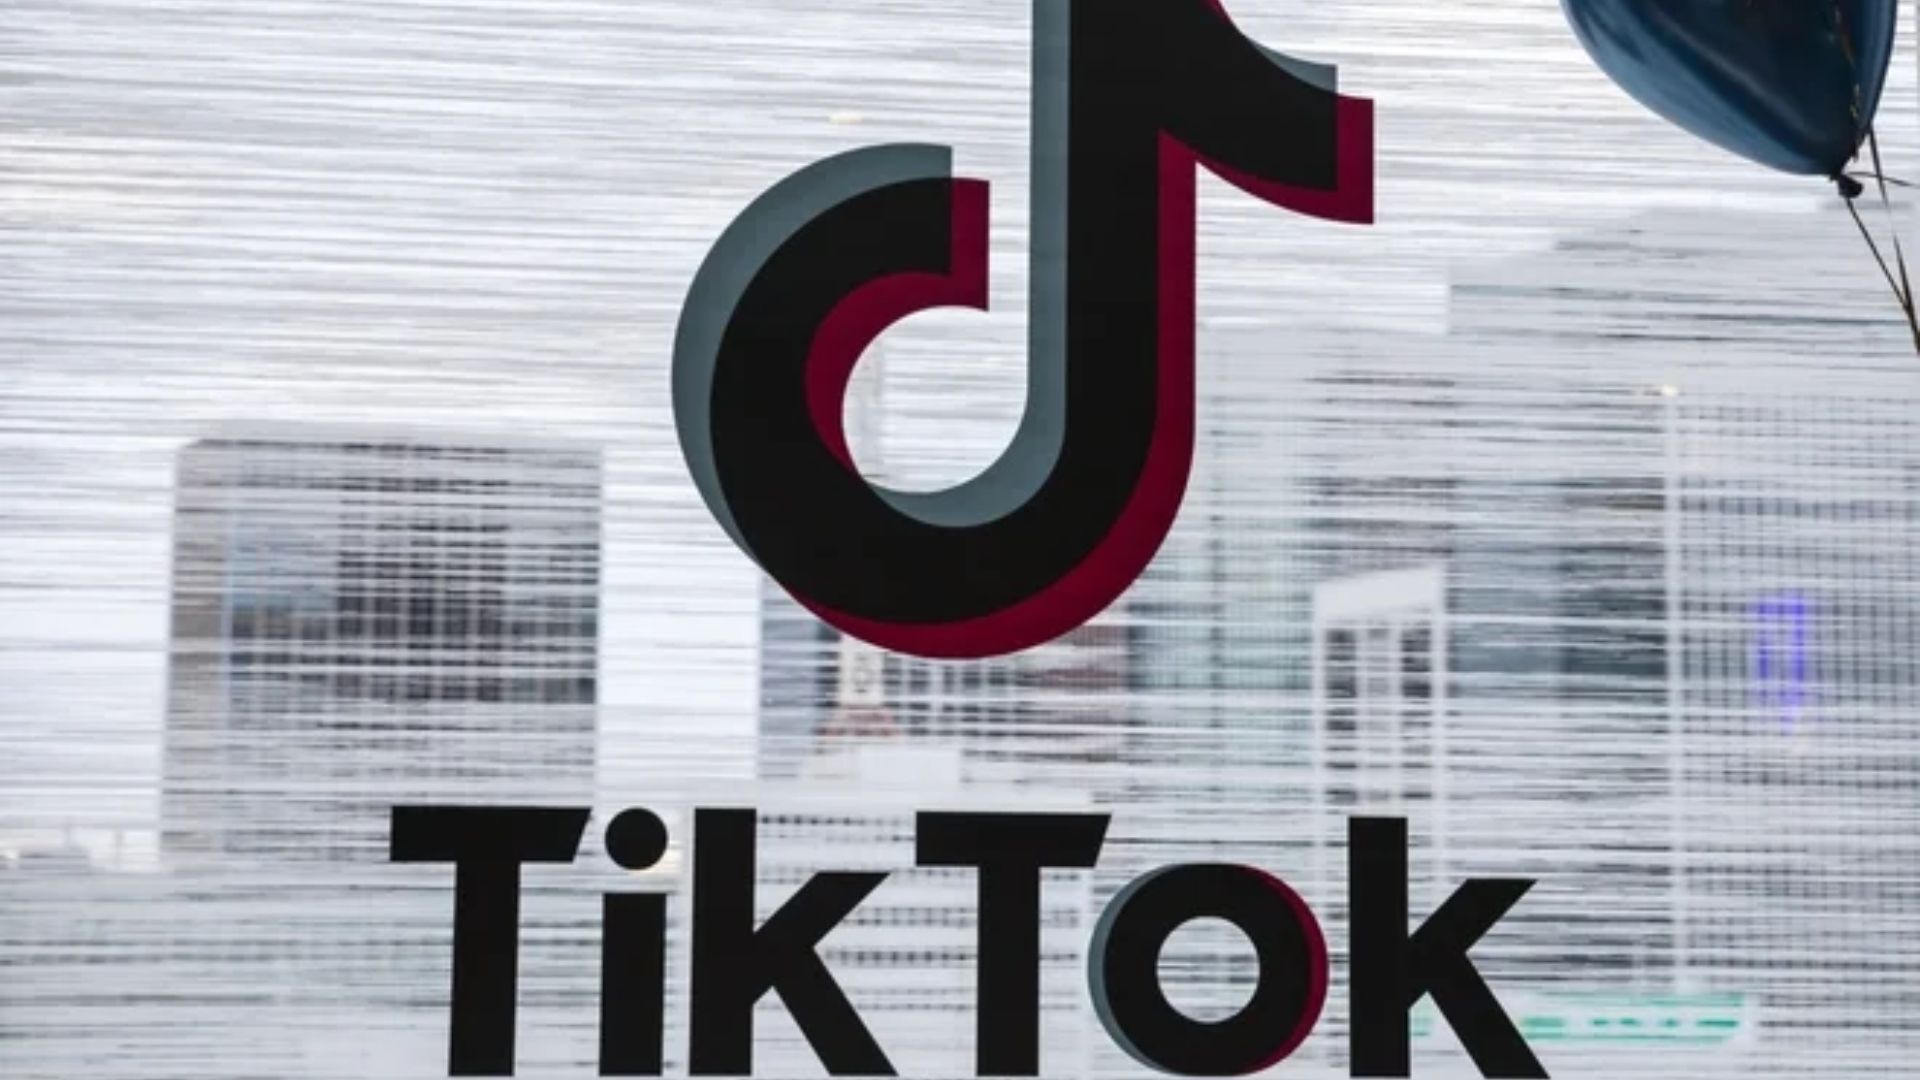 TIKTOK AND GEN Z—HOW A BAN COULD IMPACT BRANDS’ MARKETING STRATEGIES